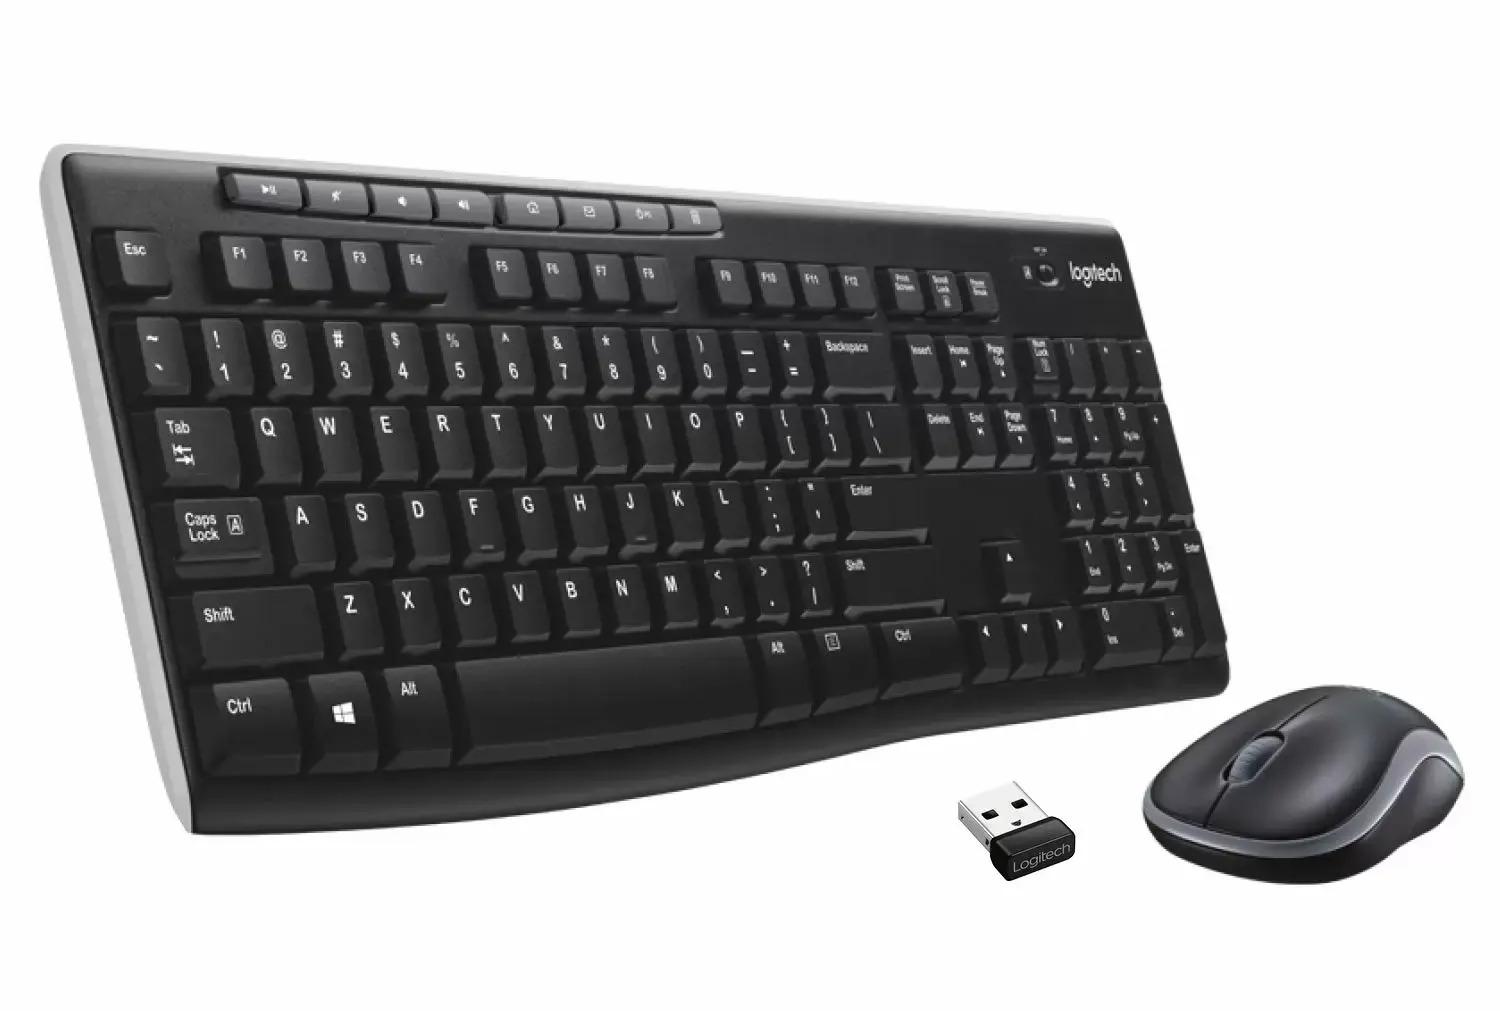 Logitech MK270 Wireless Keyboard and Mouse Combo for $19.99 Shipped